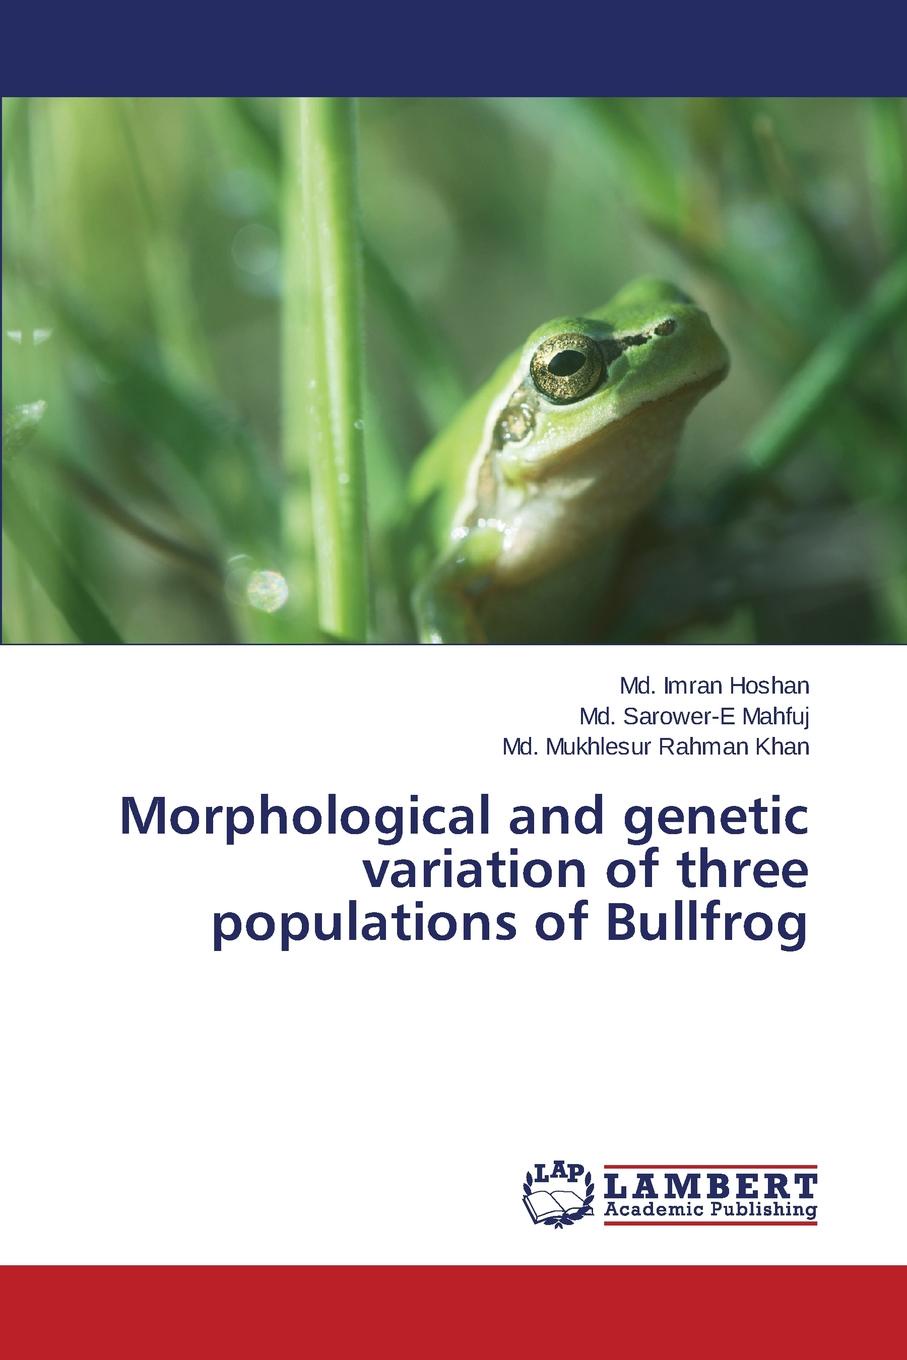 Morphological and genetic variation of three populations of Bullfrog